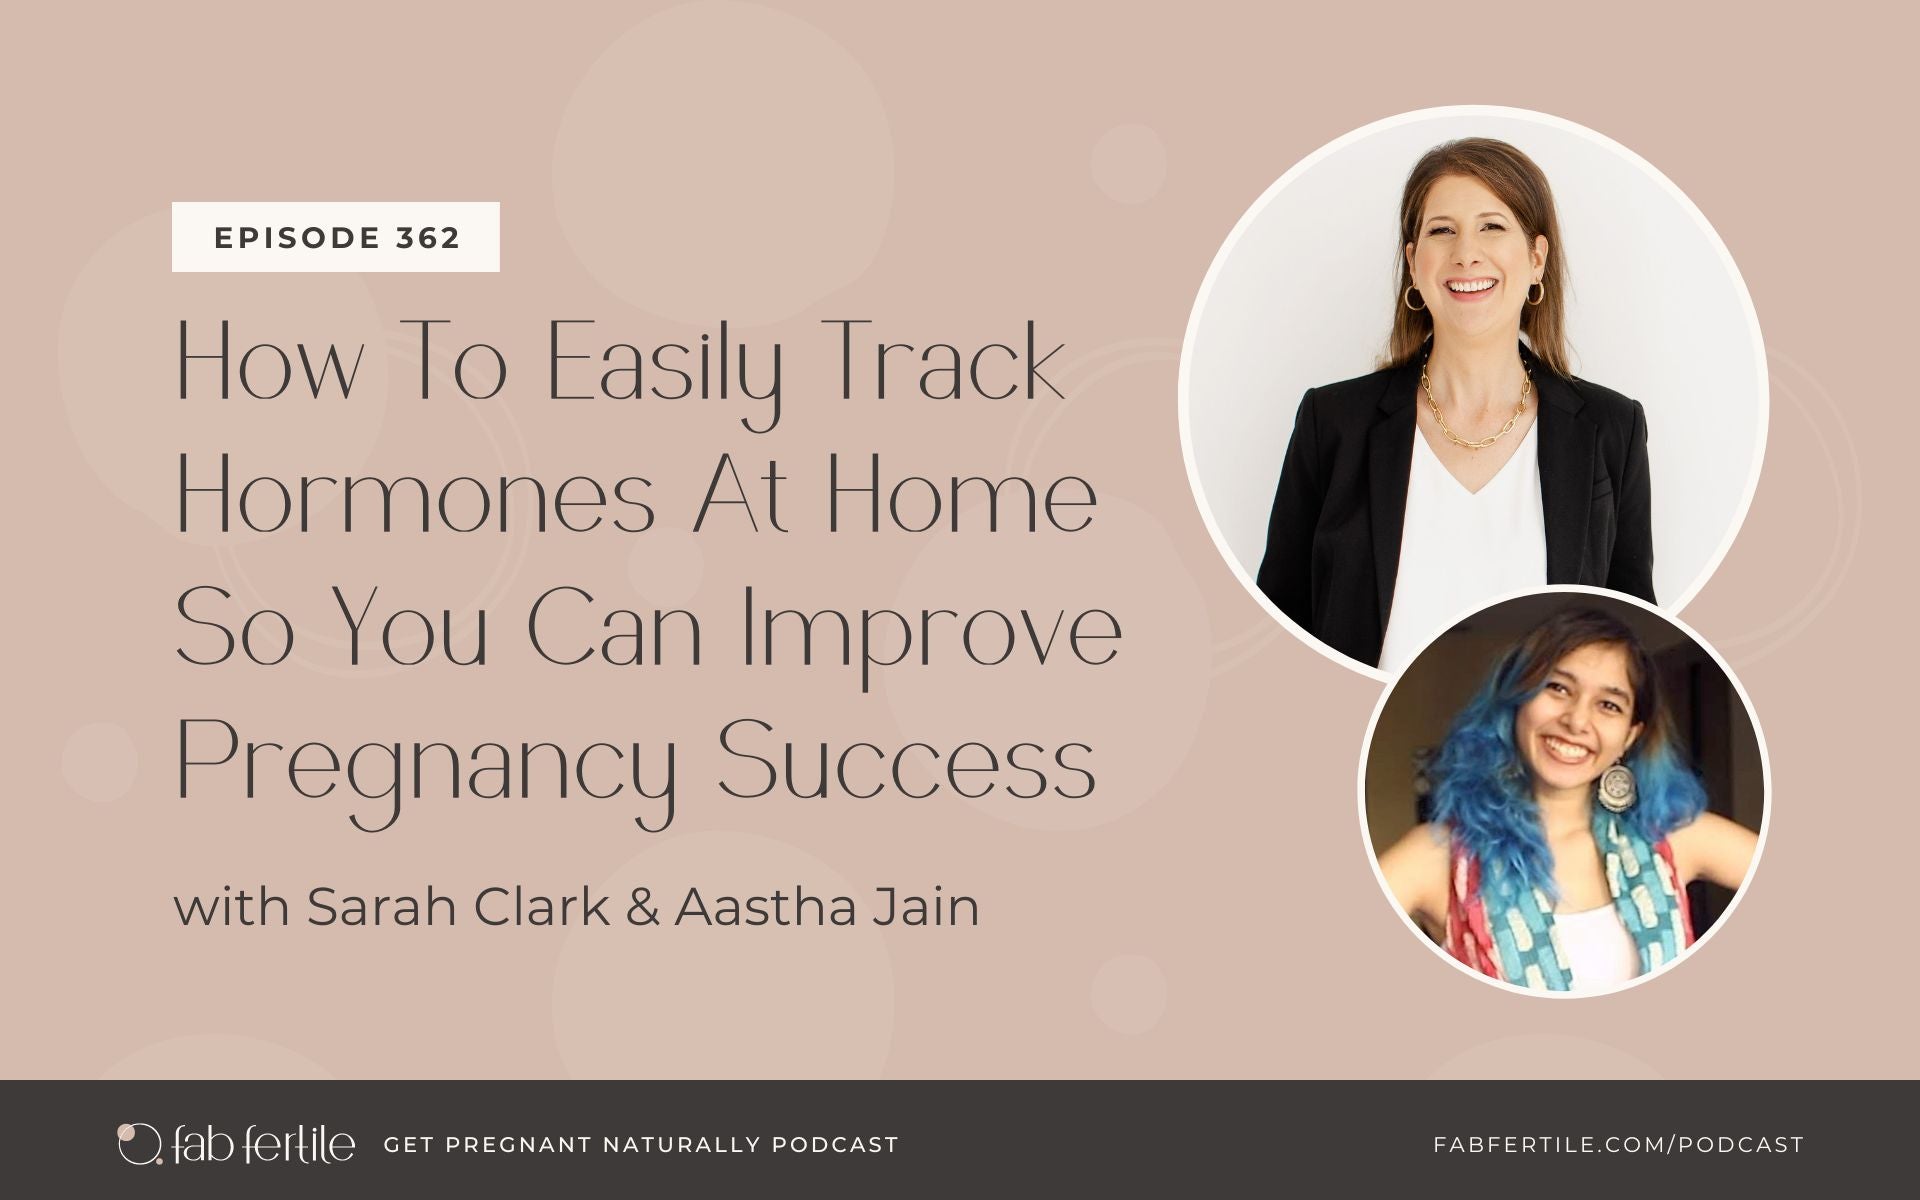 How To Easily Track Hormones At Home So You Can Improve Pregnancy Success